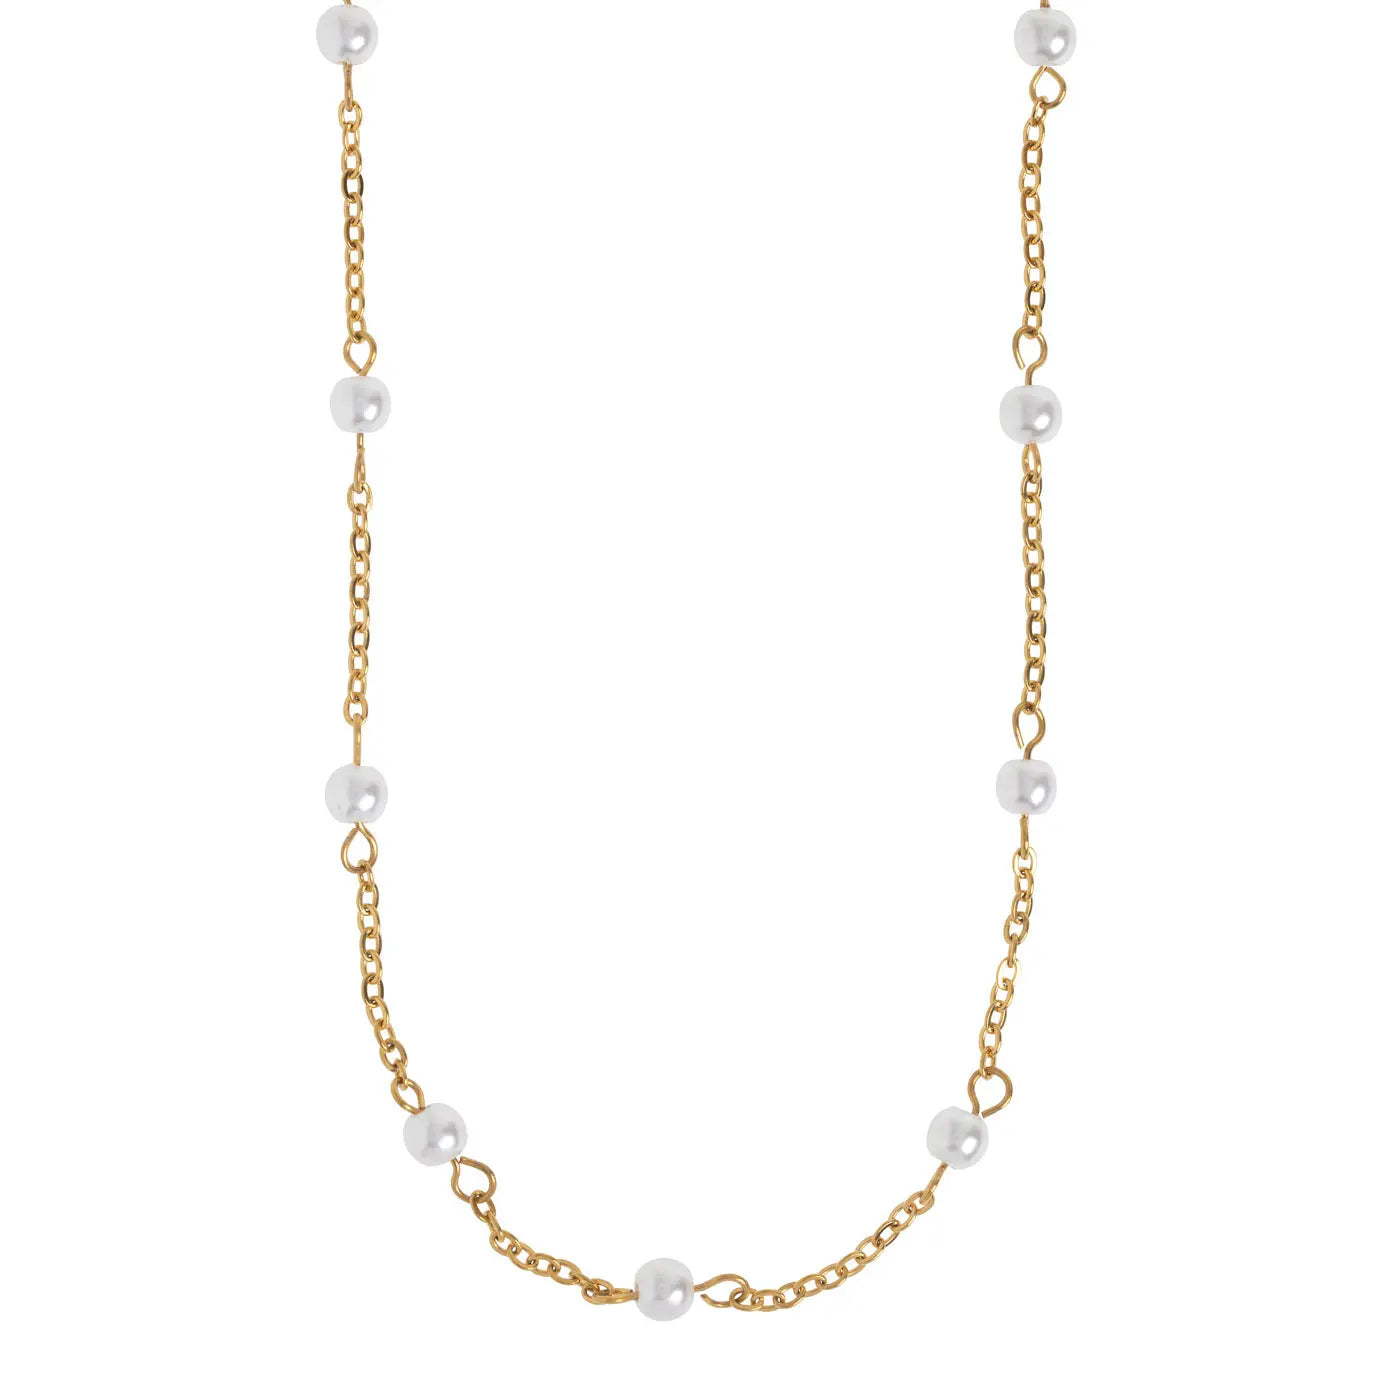 Estelle - Soft Pearl Necklace Stainless Steel